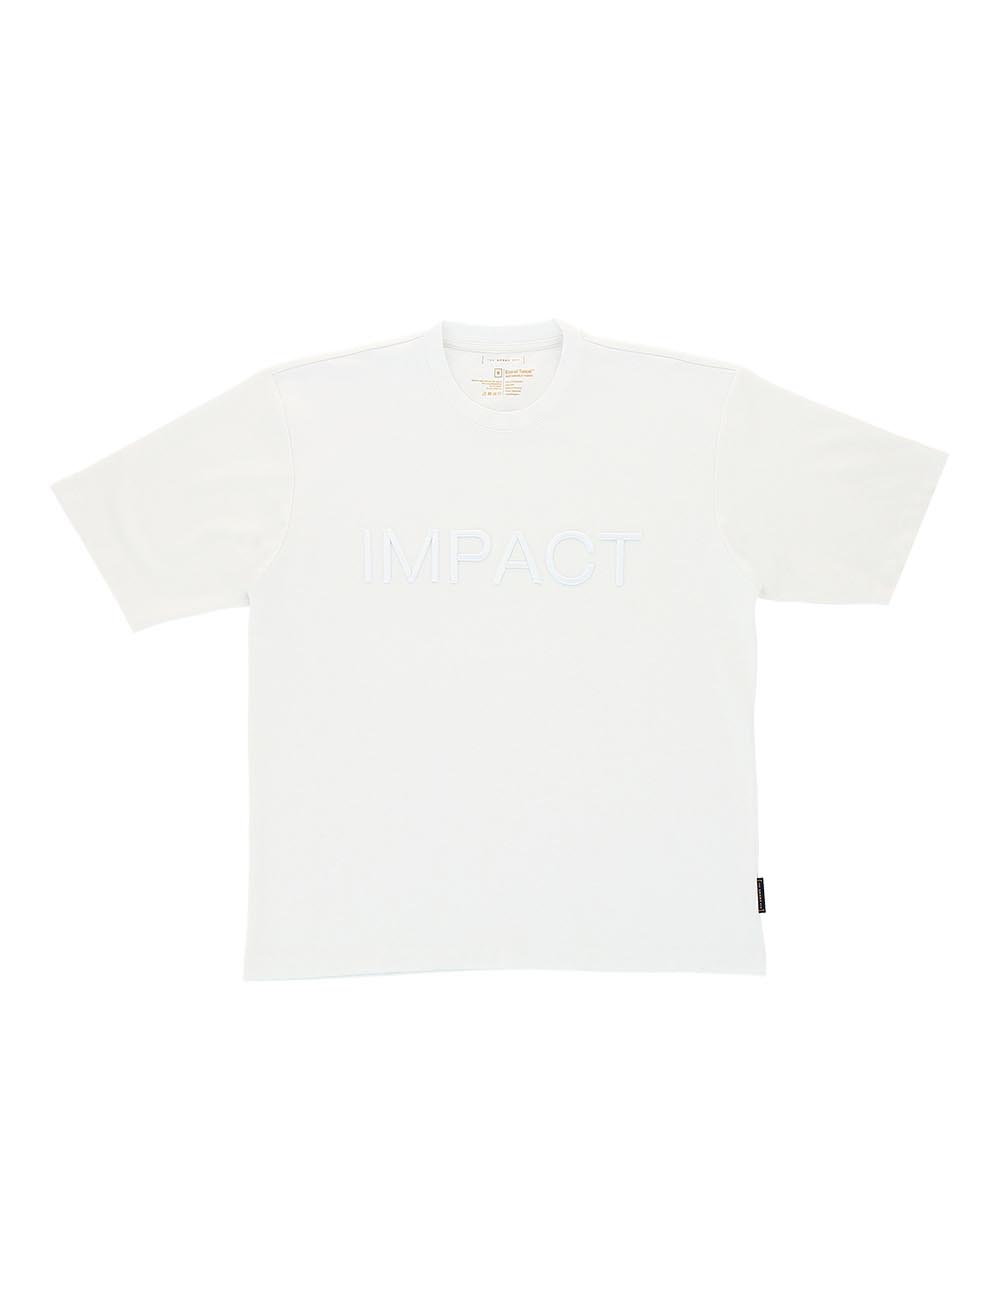 Solid White IMPACT Embroidery Tencel Oversized T-Shirt | The Shirt Bar